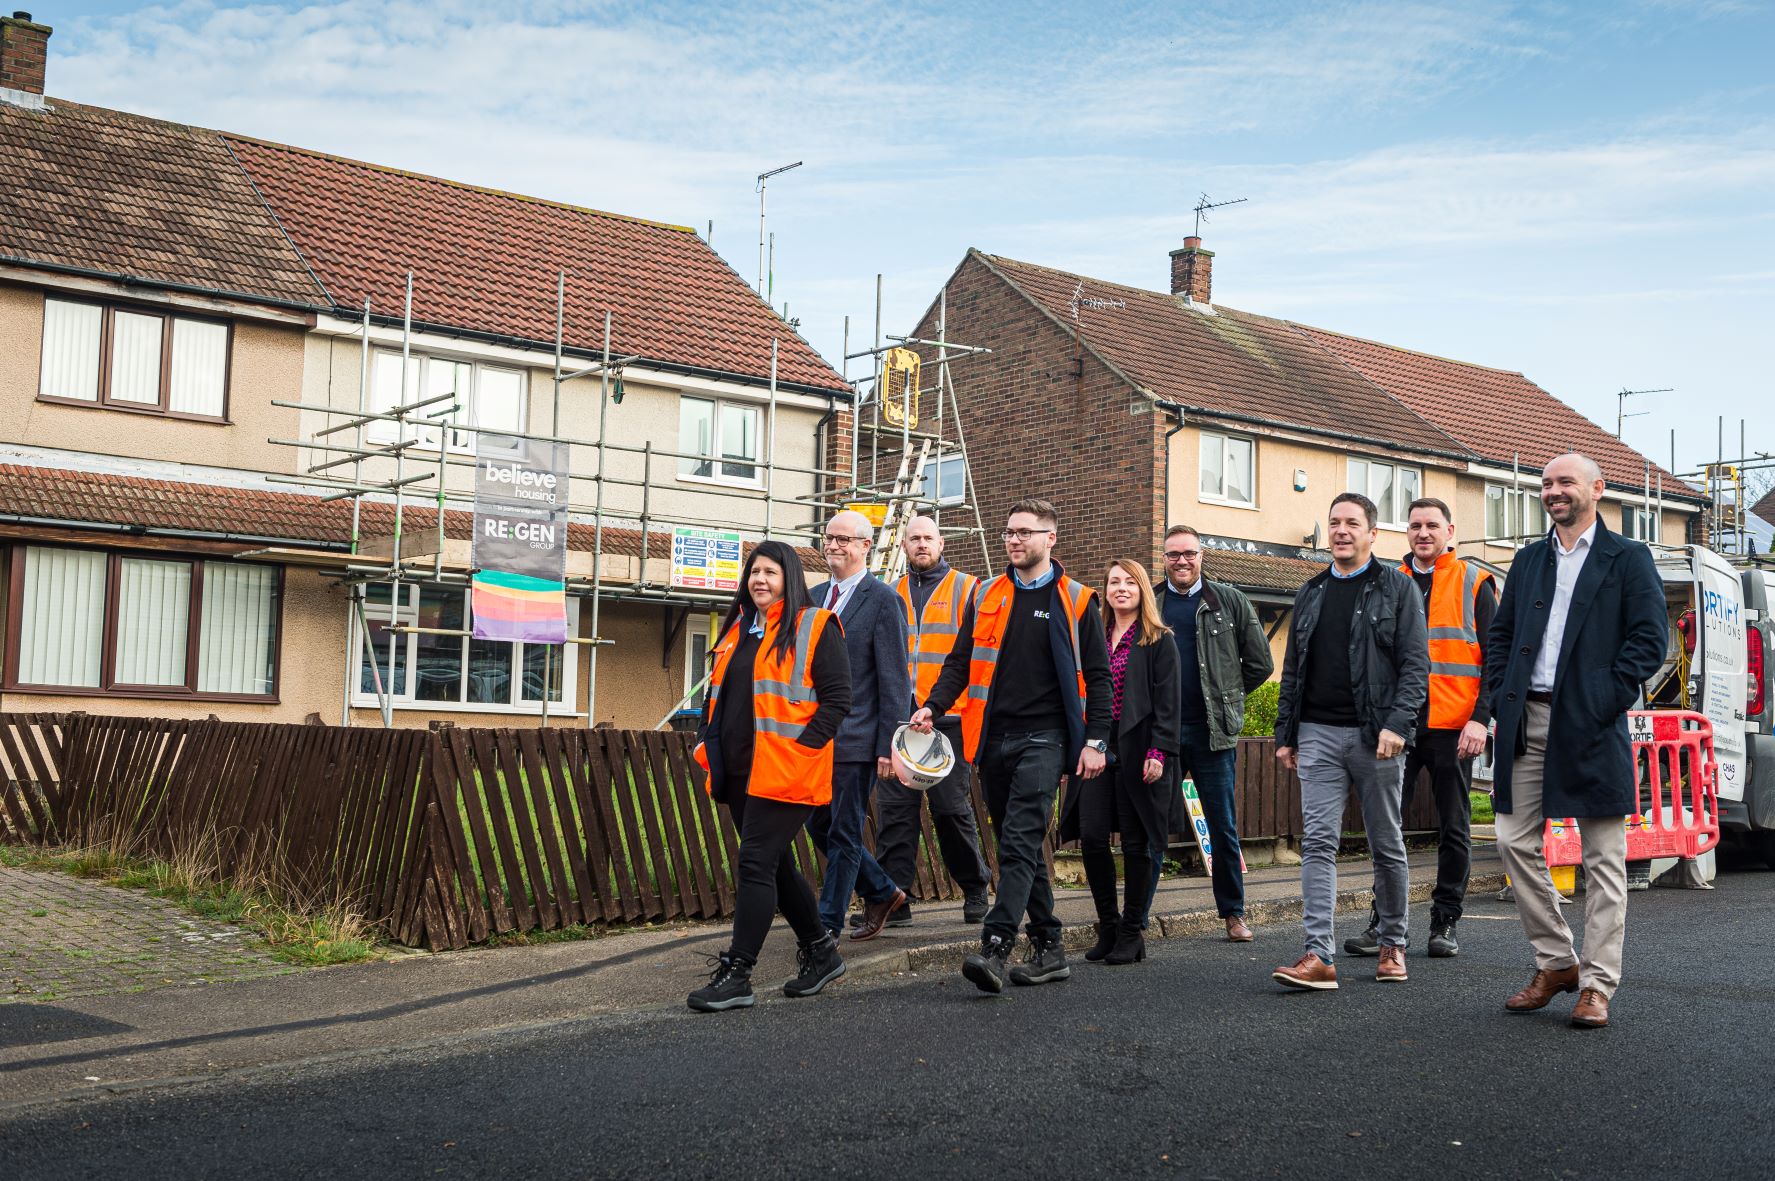 Team work: Colleagues from believe housing and RE:GEN Group in Peterlee, where the a scheme to upgrade the energy efficiency of 1,000 homes has reached the halfway stage